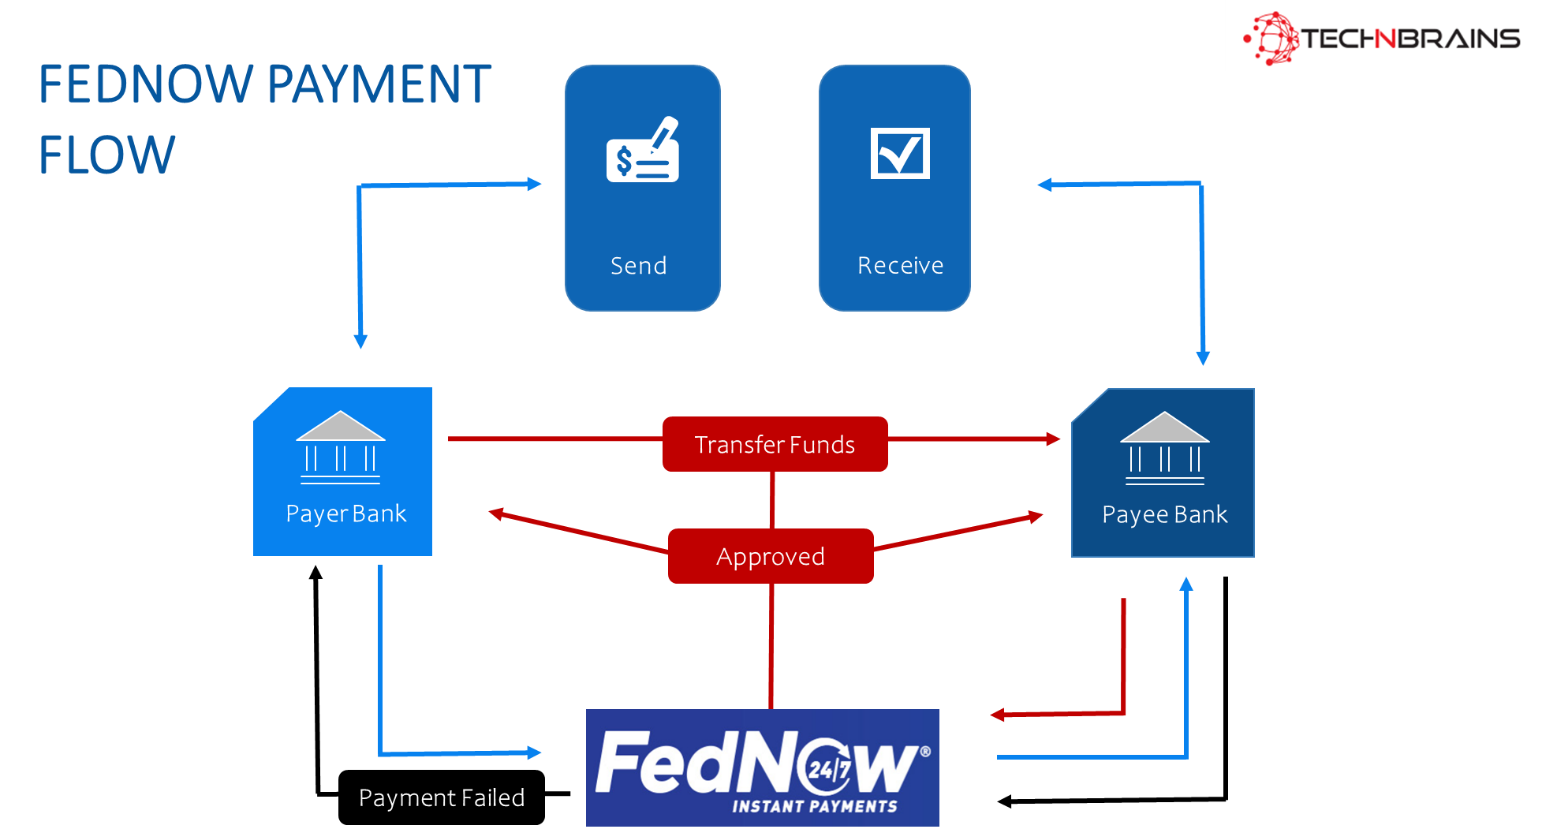 FedNow payment flow